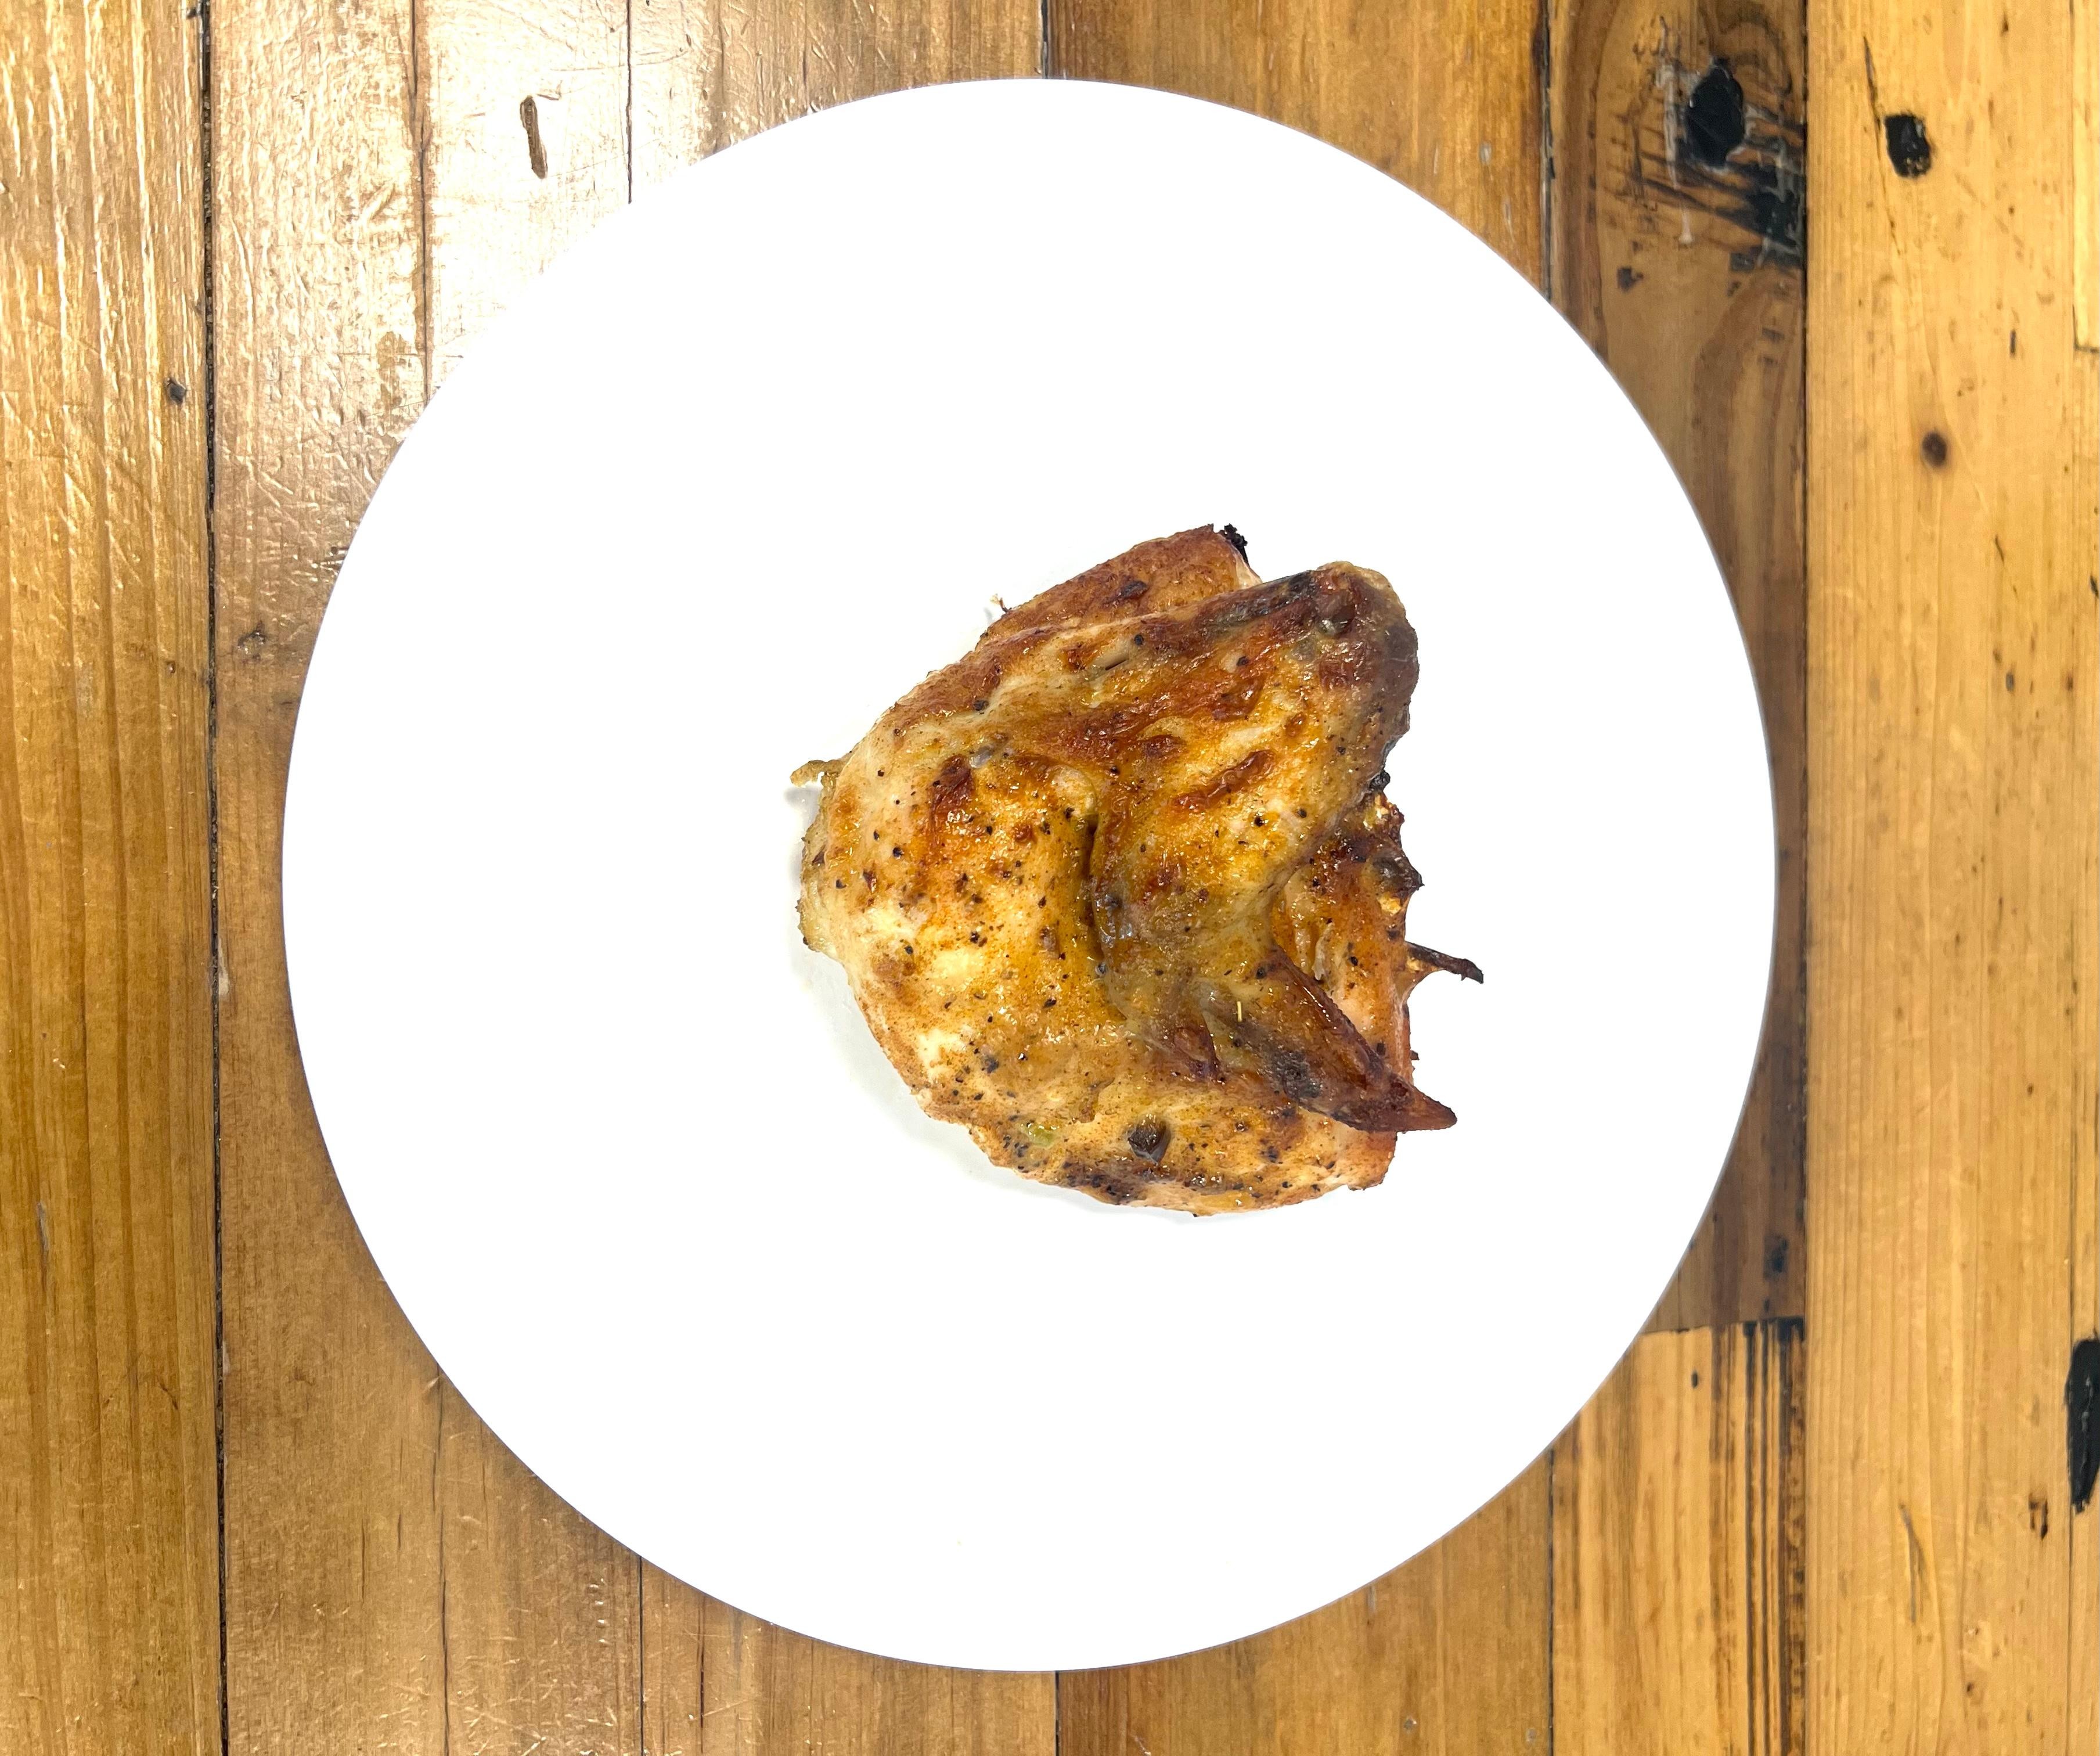 Baked Chicken - Single Serving